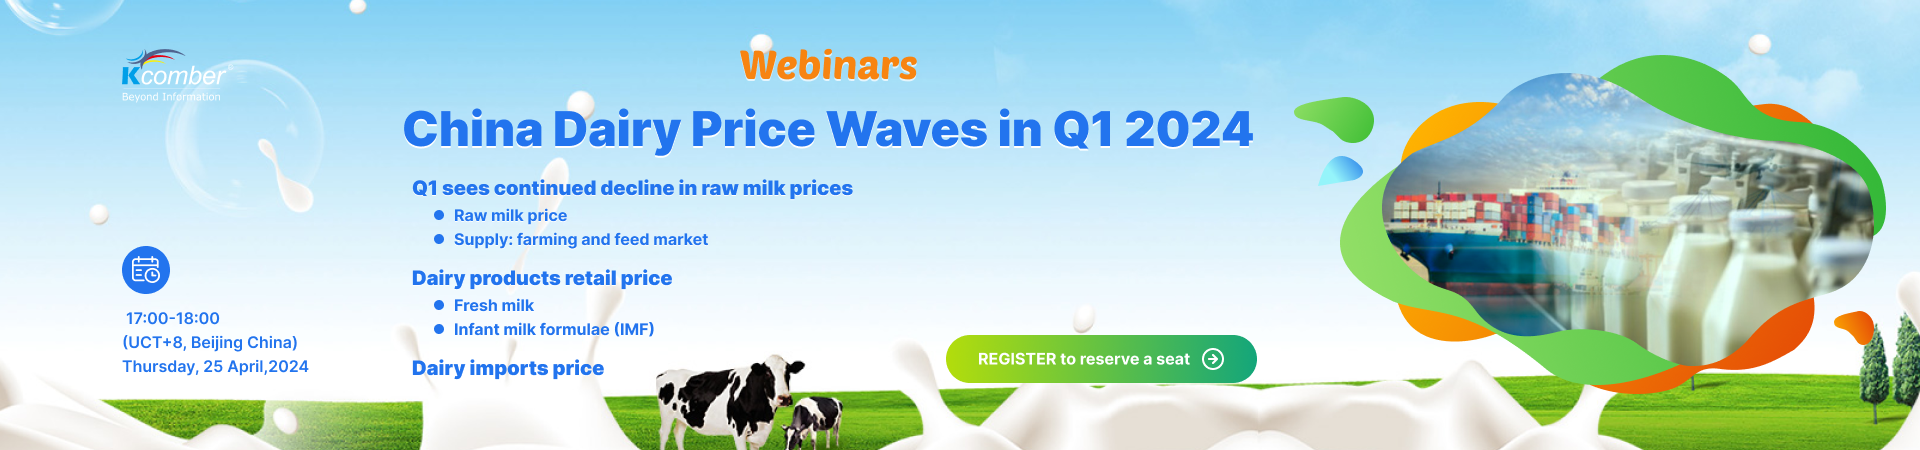 China's Dairy Price Waves in Q1 2024